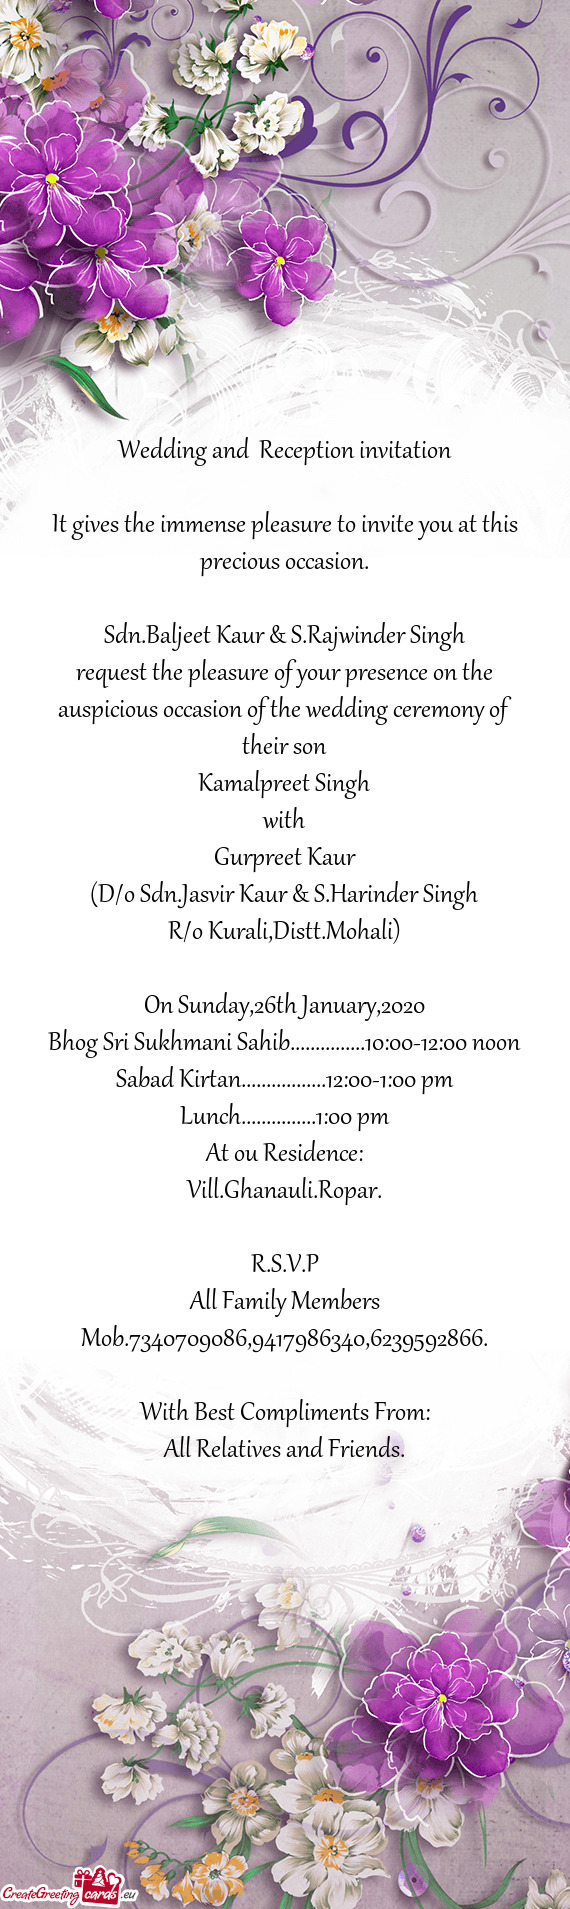 It gives the immense pleasure to invite you at this precious occasion